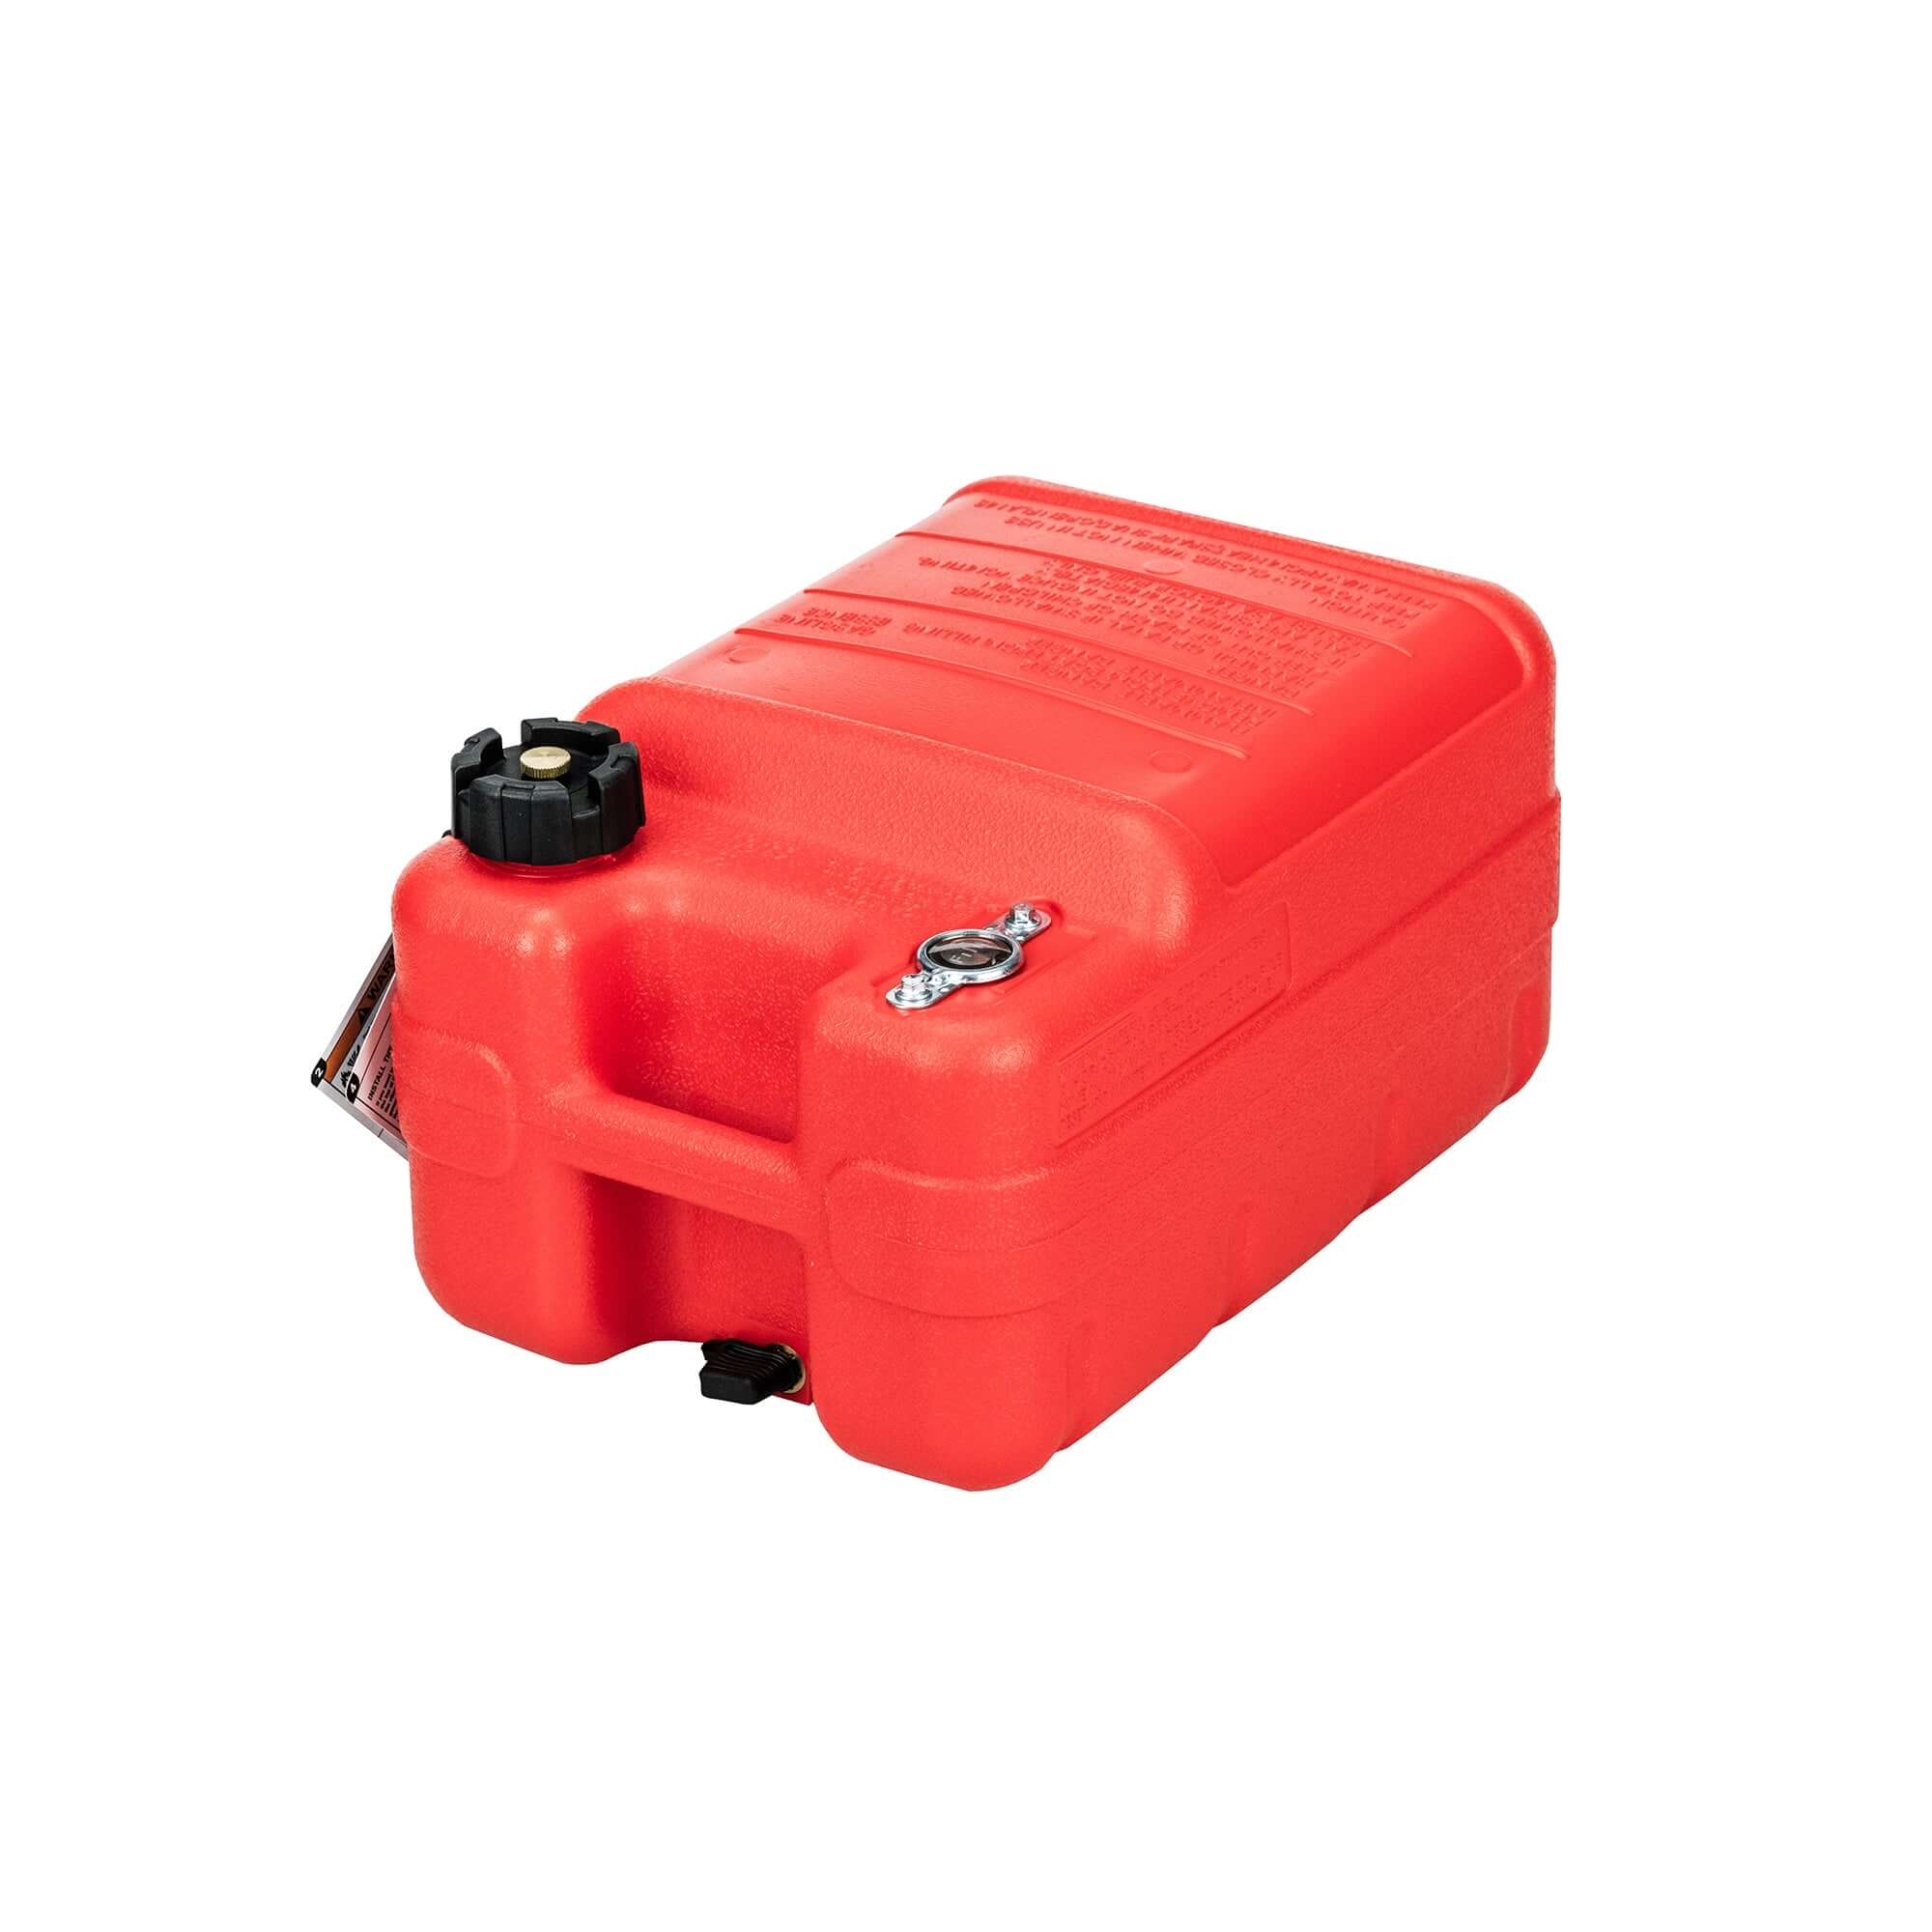 External Fuel Tank with 3 Gallon( 14.5L) Capacity